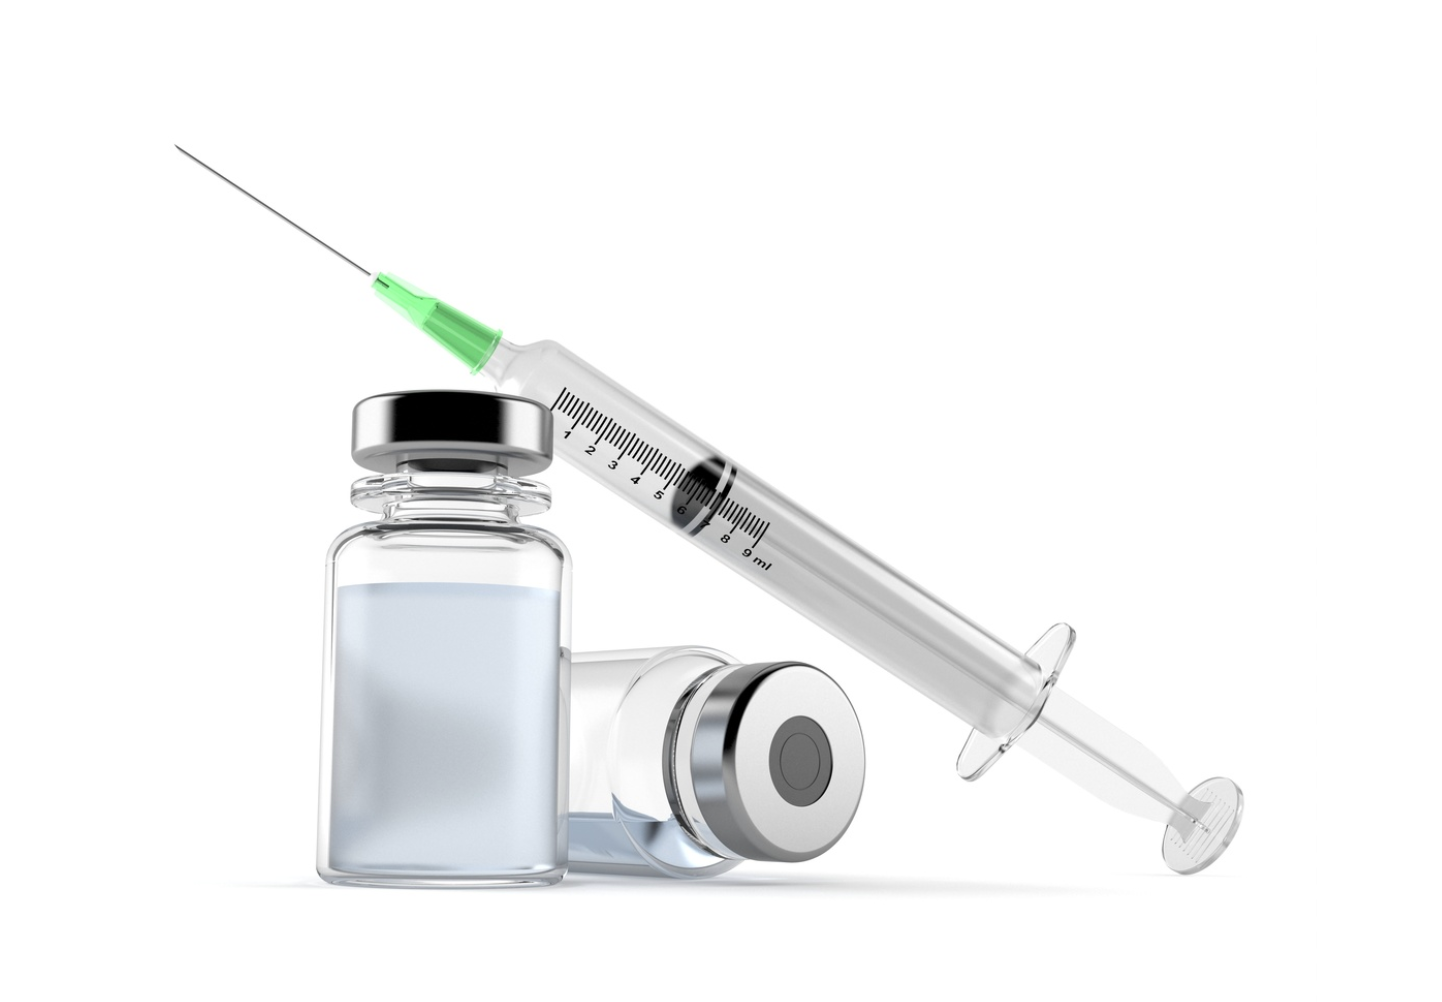 New Rules on Mandatory COVID-19 Vaccinations: Applicability to Pharmacies